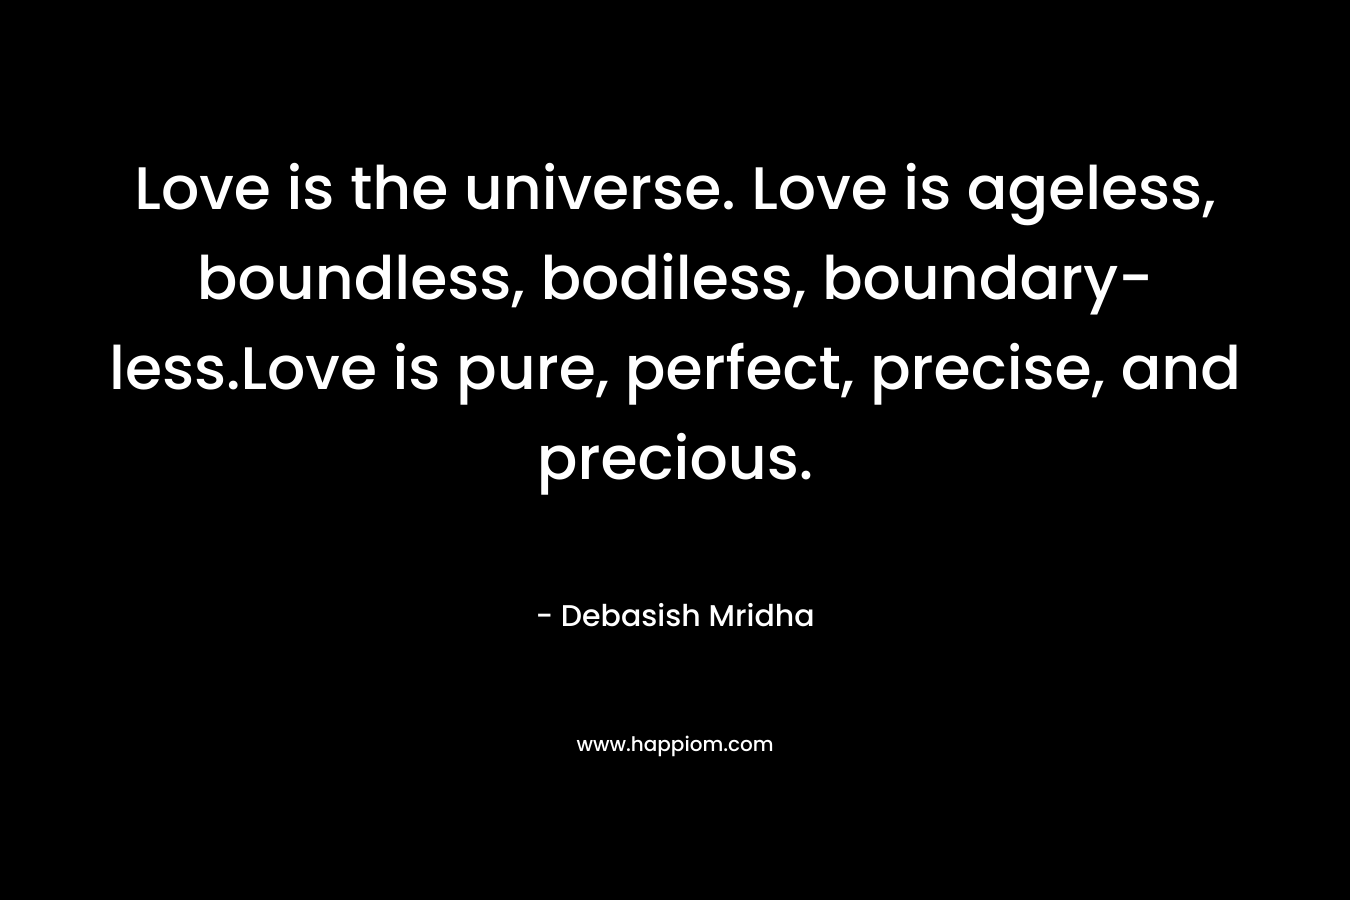 Love is the universe. Love is ageless, boundless, bodiless, boundary-less.Love is pure, perfect, precise, and precious. – Debasish Mridha